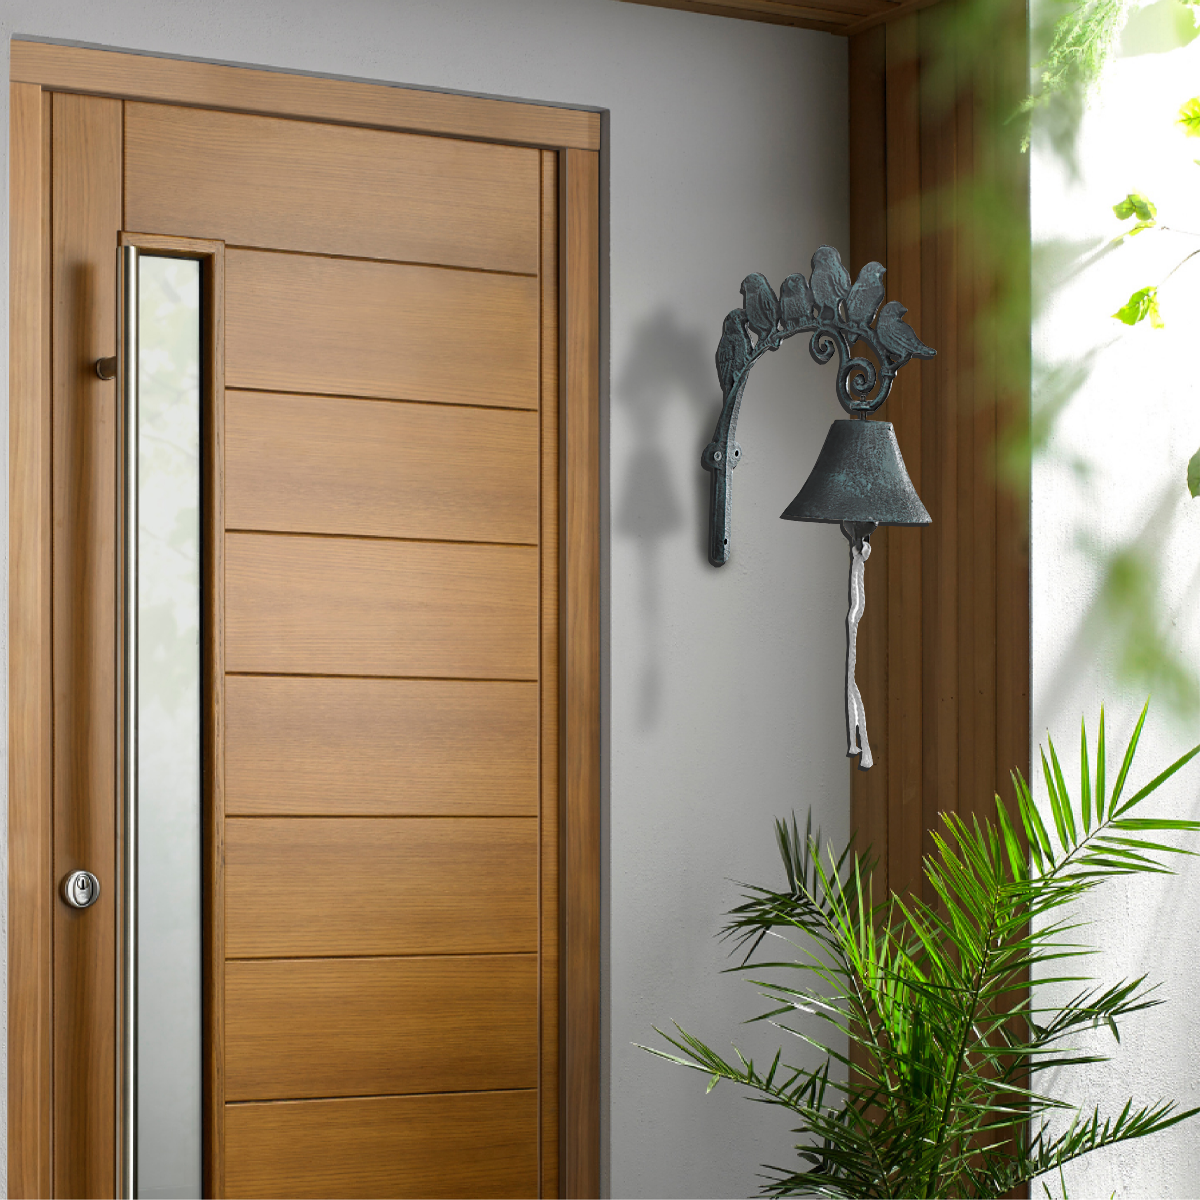 Things you can do with a doorbell — Inspiration